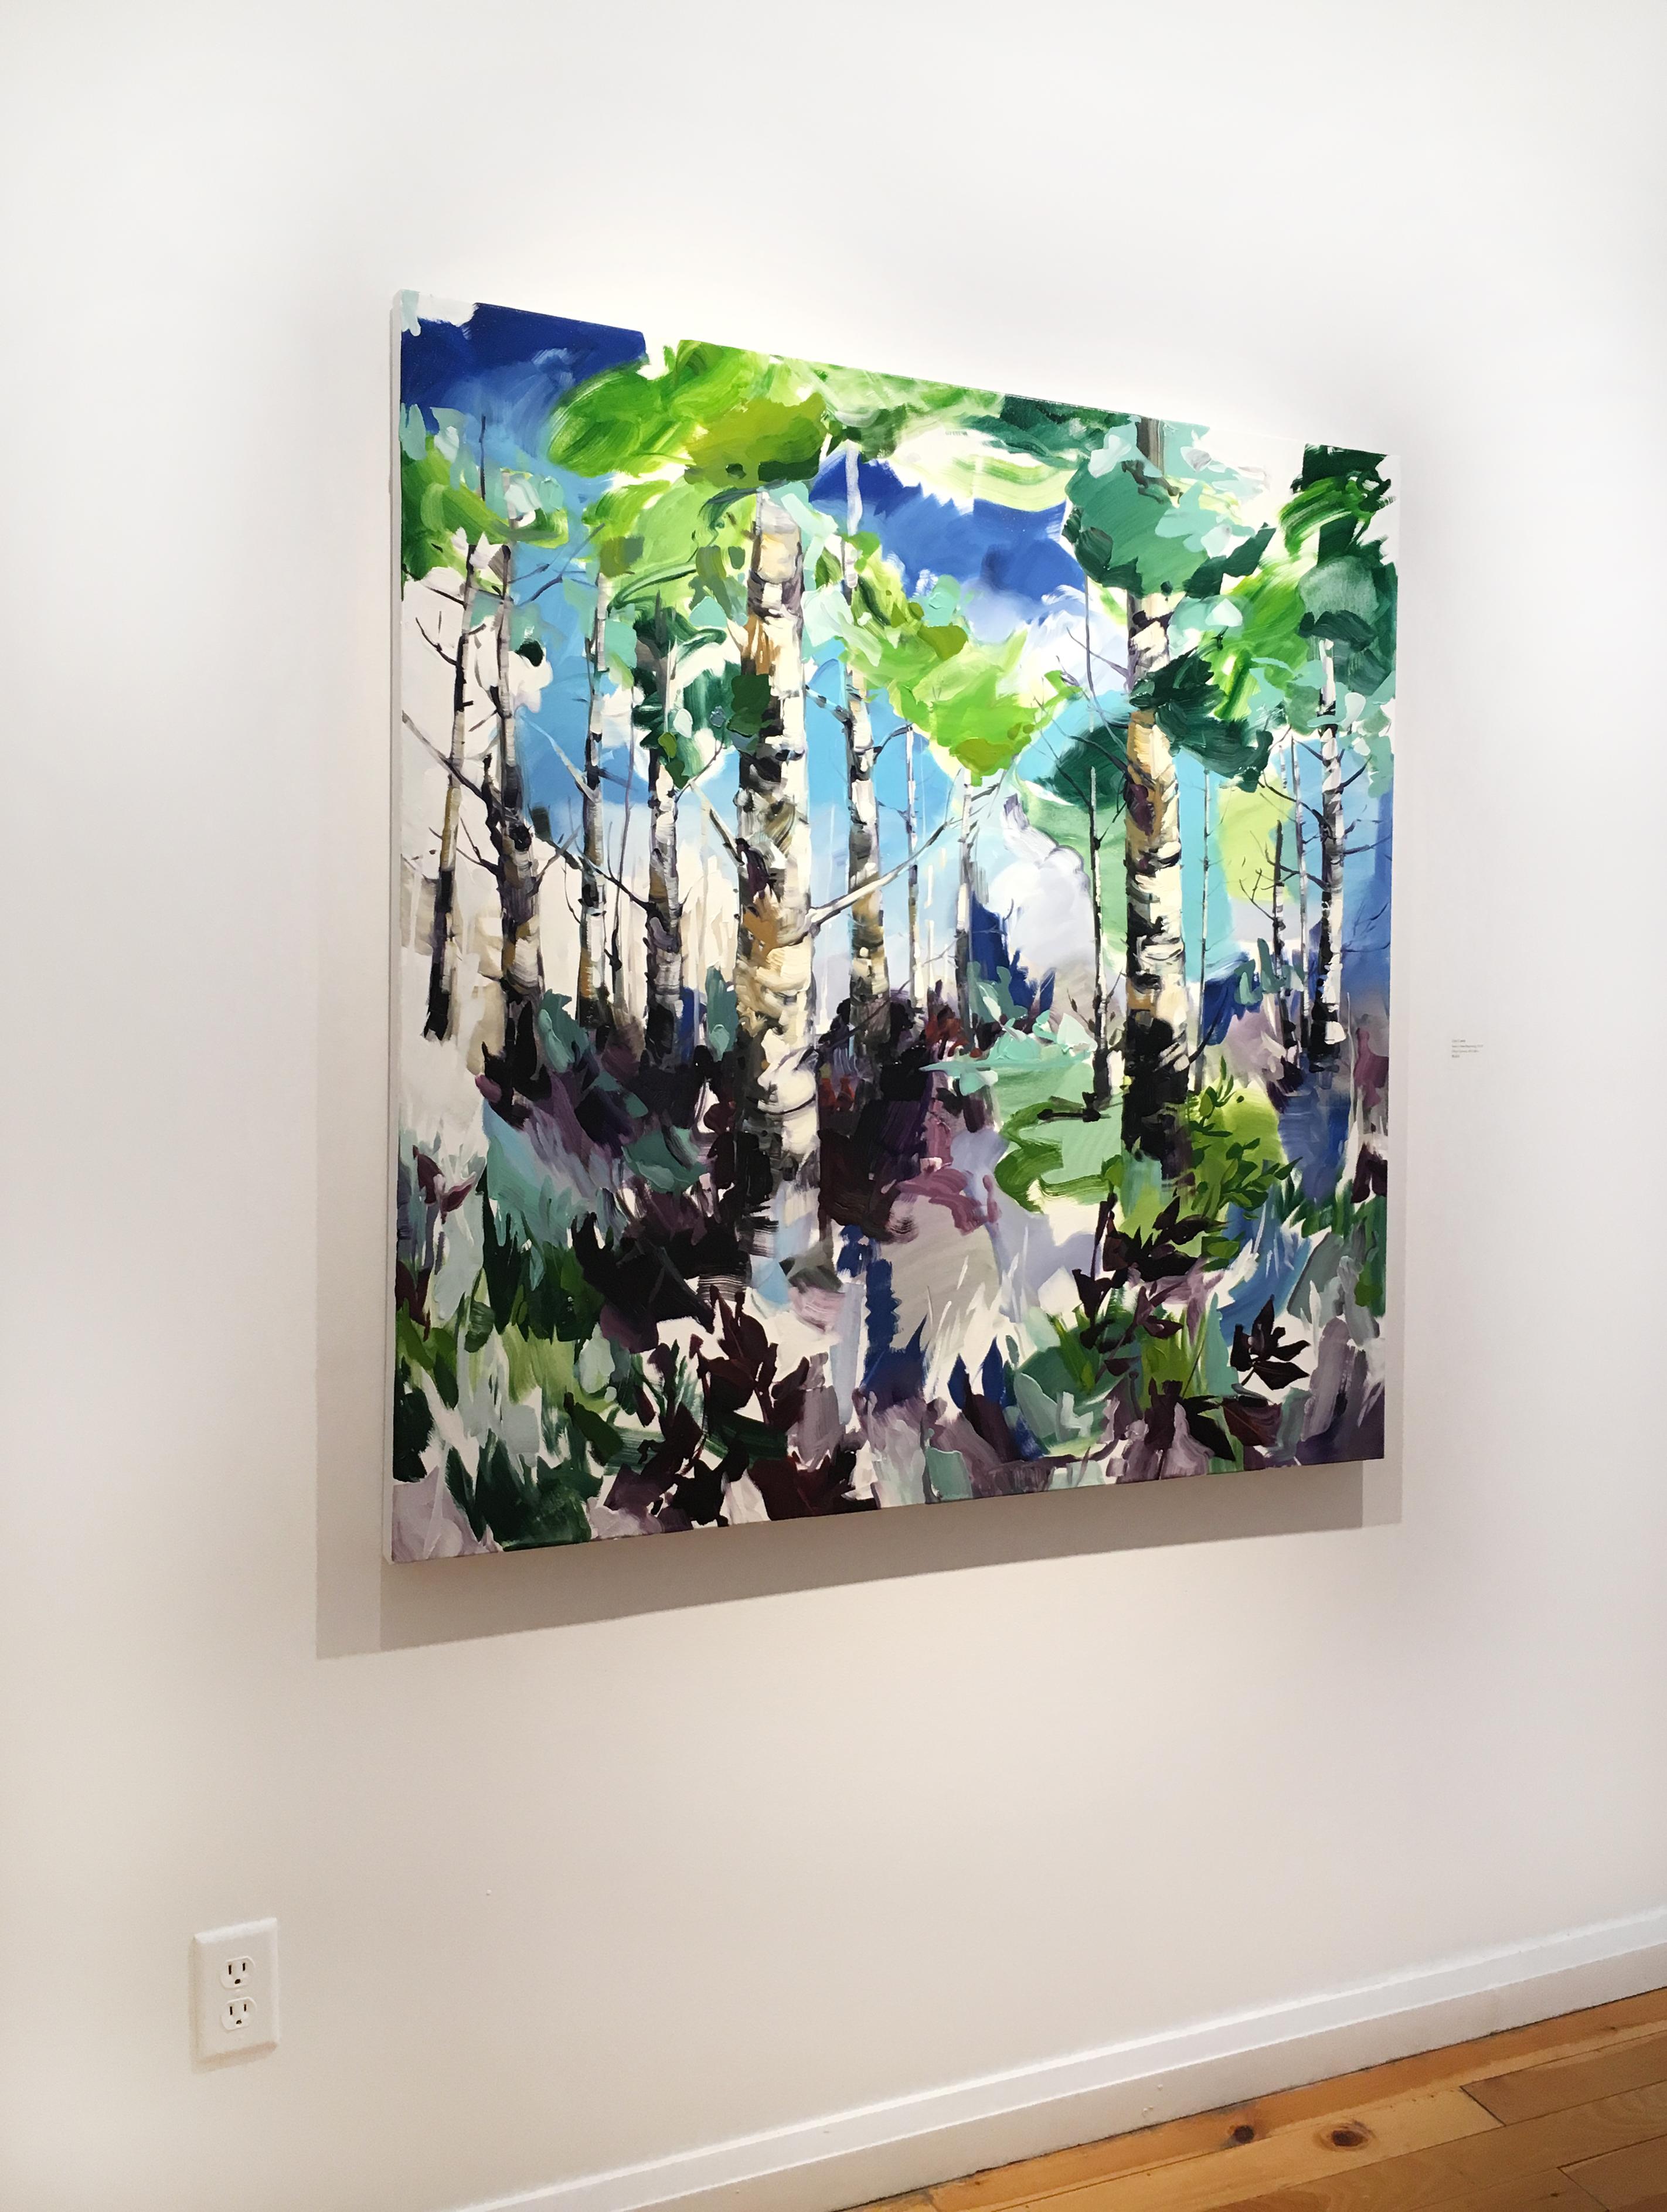 Creed's oil paintings reveal swatches of canvas, and incorporate spontaneous gestural, textured painting with instances of both varnished and matte surfaces. Works can be hung framed or unframed.

Cori Creed is an established West Coast Canadian